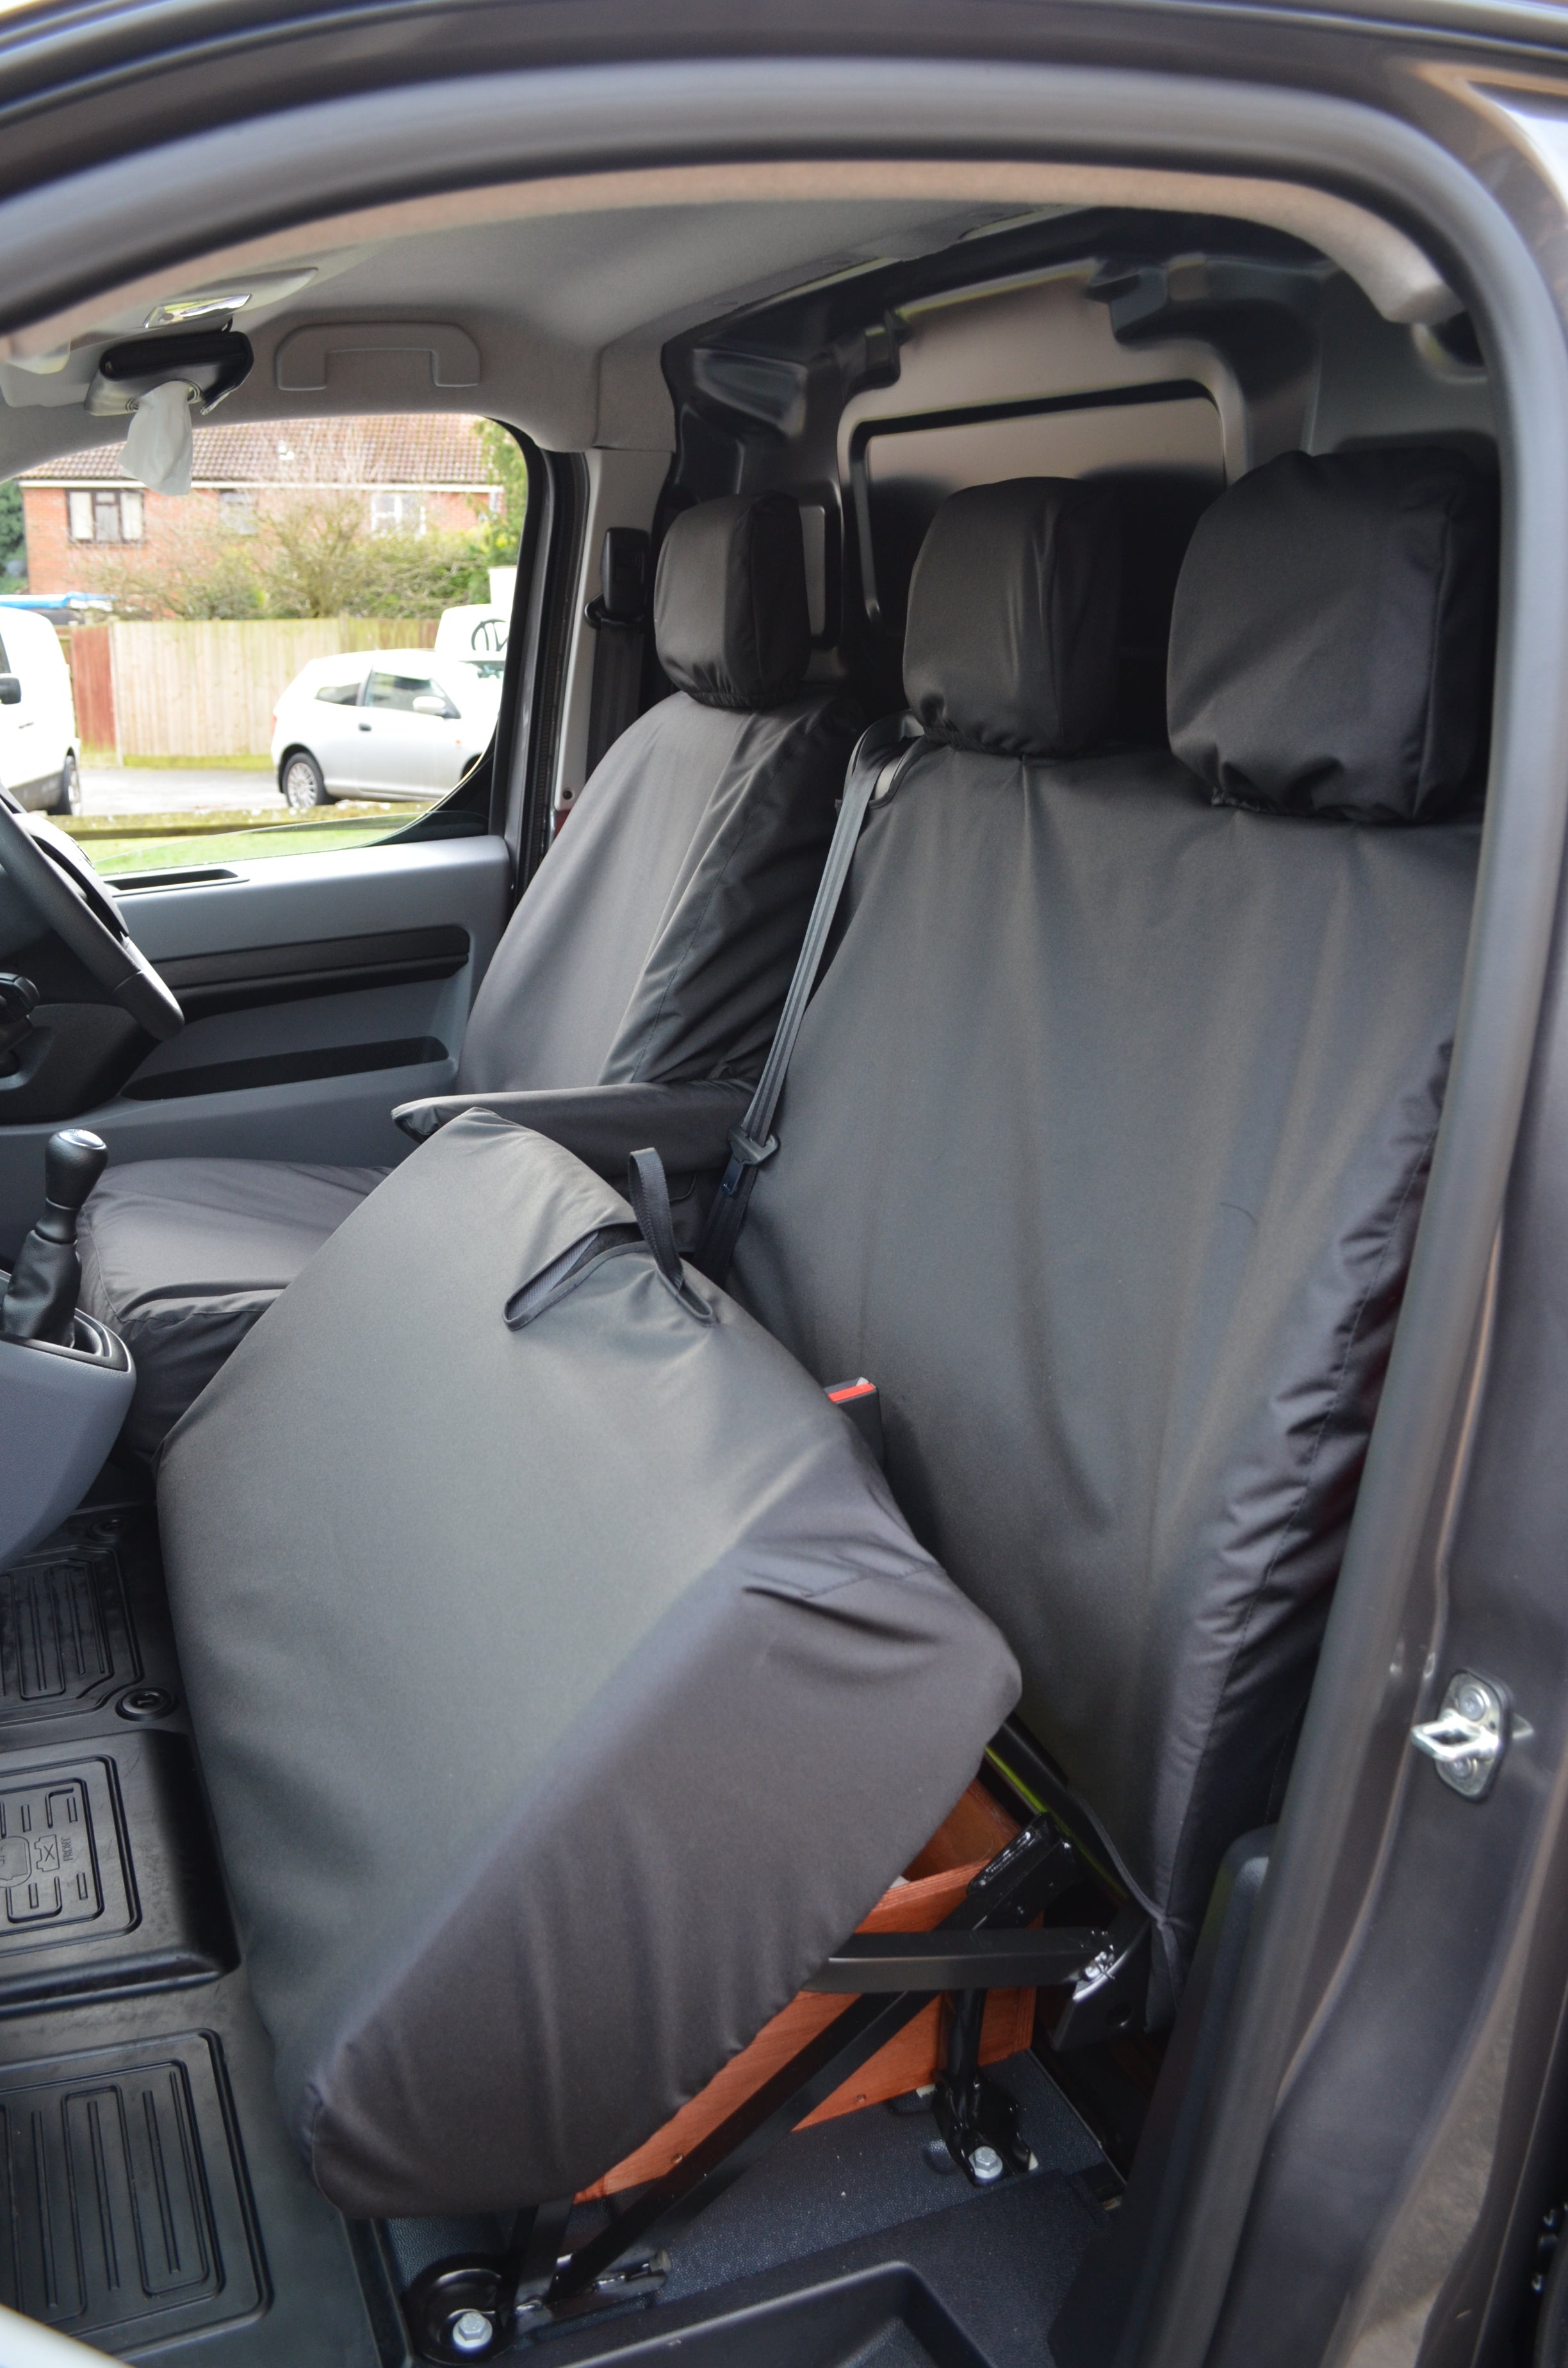 Toyota Proace 2016 Onwards Seat Covers  Turtle Covers Ltd